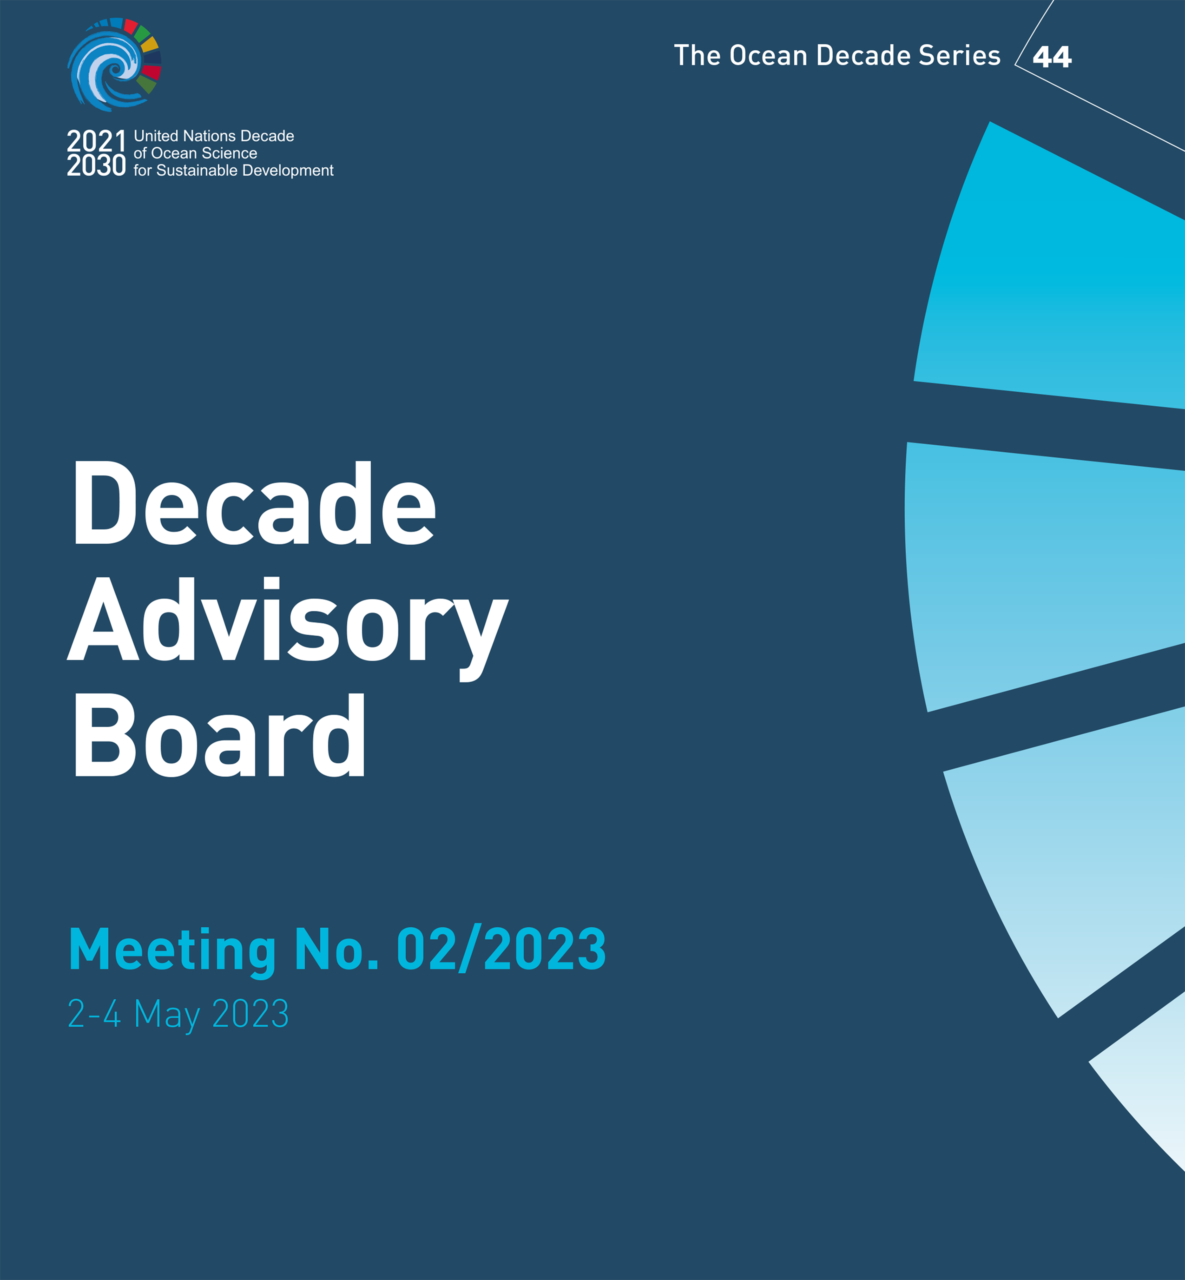 Report of the Fifth meeting of the Decade Advisory Board (2-4 May 2023)